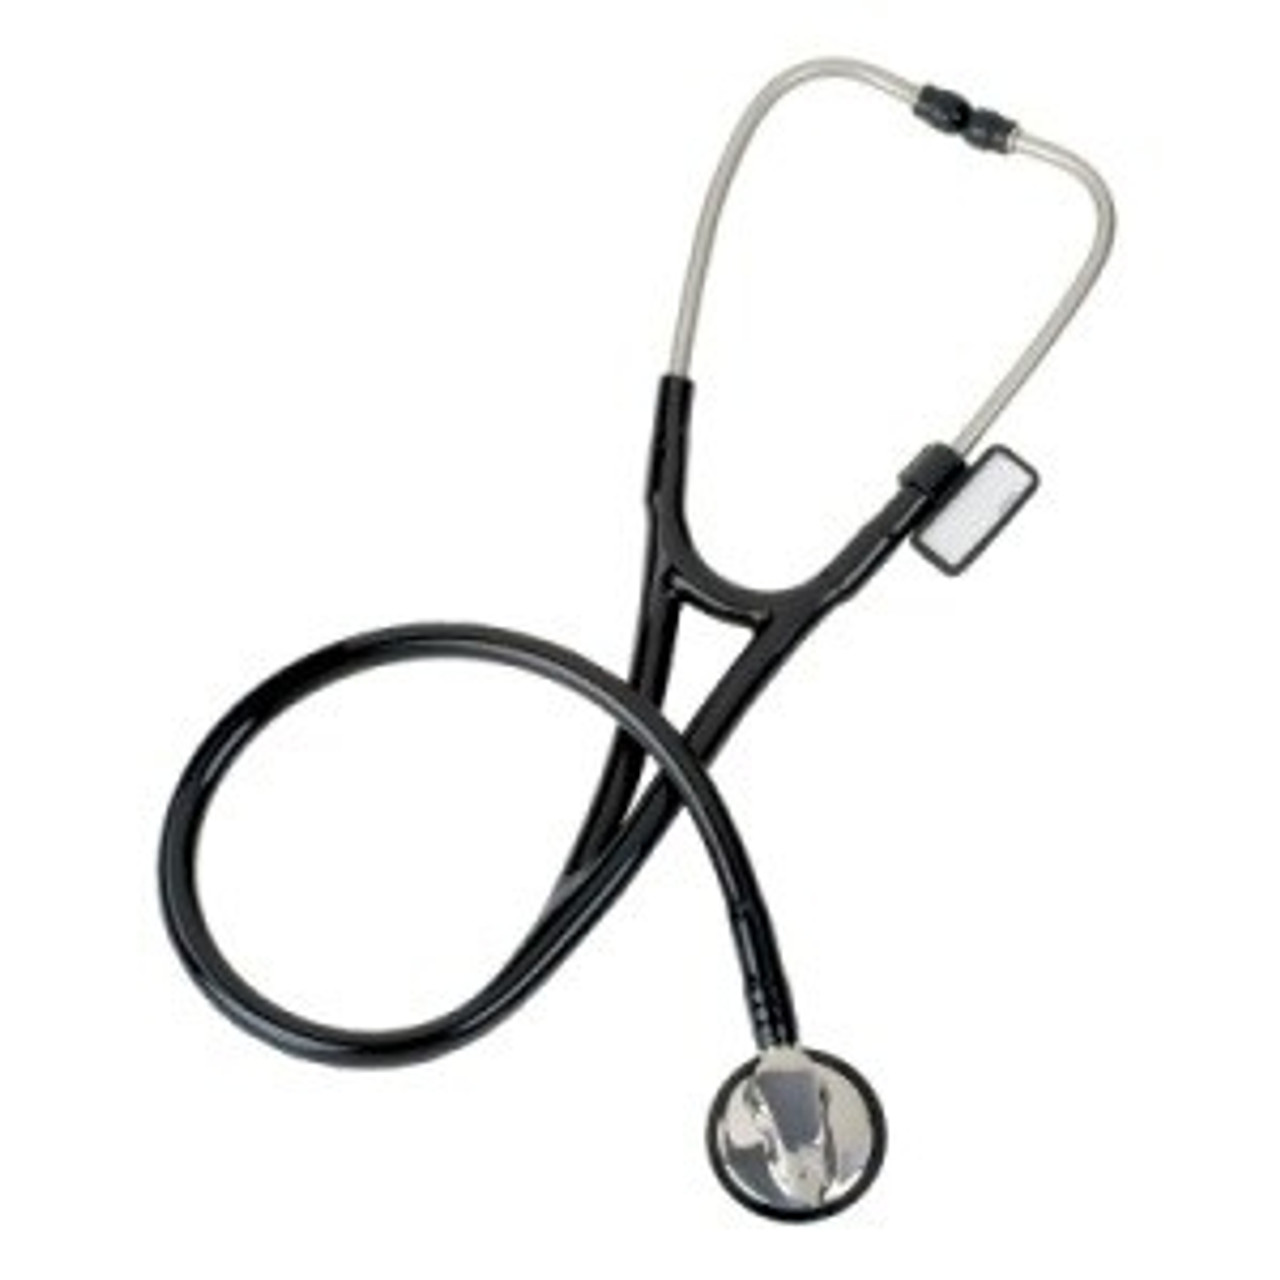 Signature Series Low Profile Adult Stethoscope by Briggs Healthcare